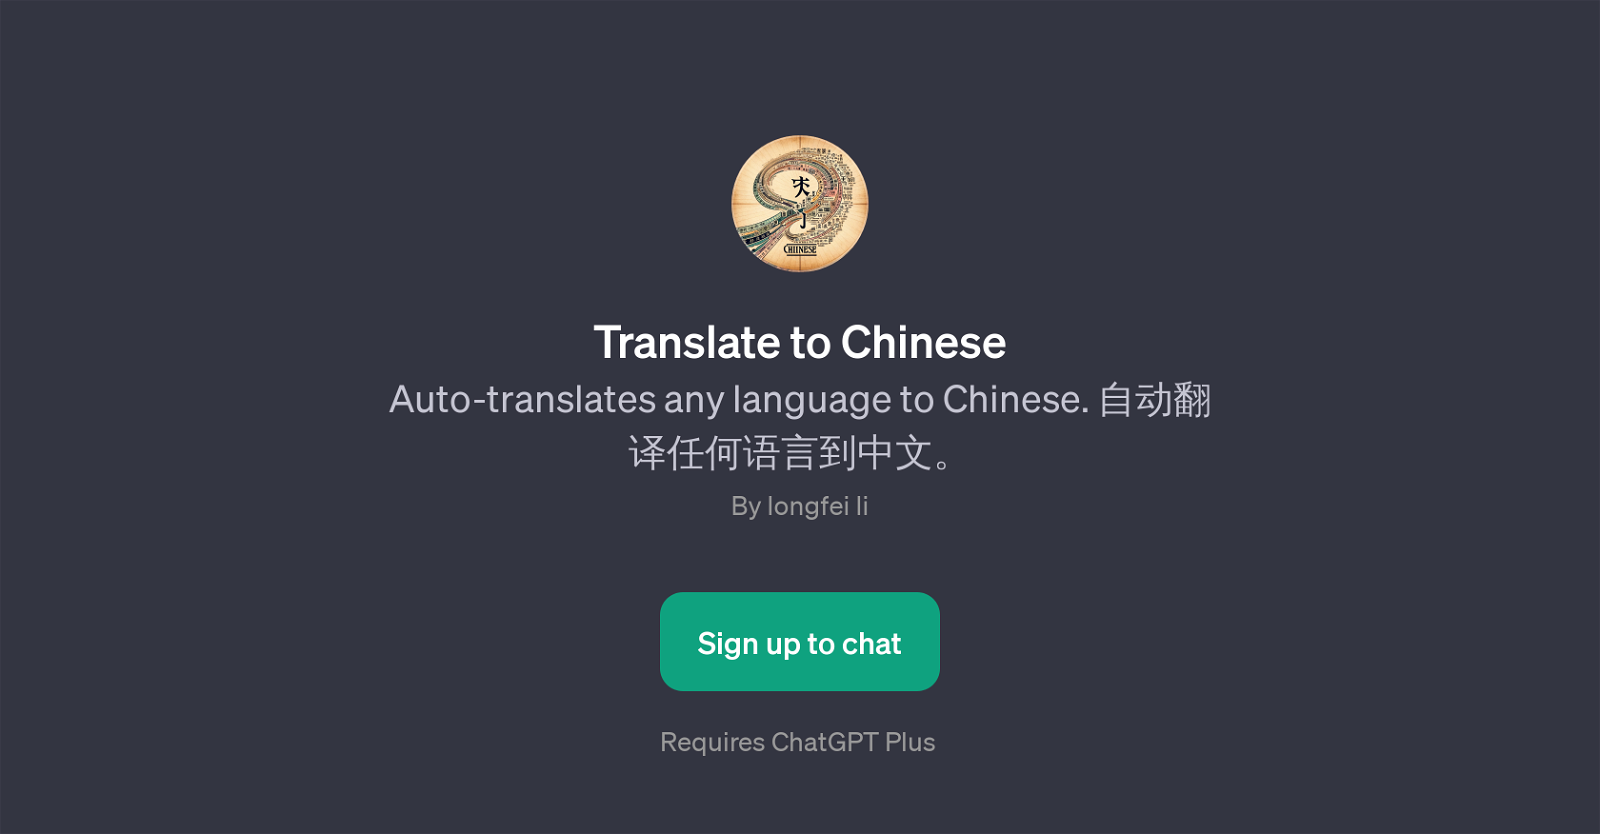 Translate to Chinese website